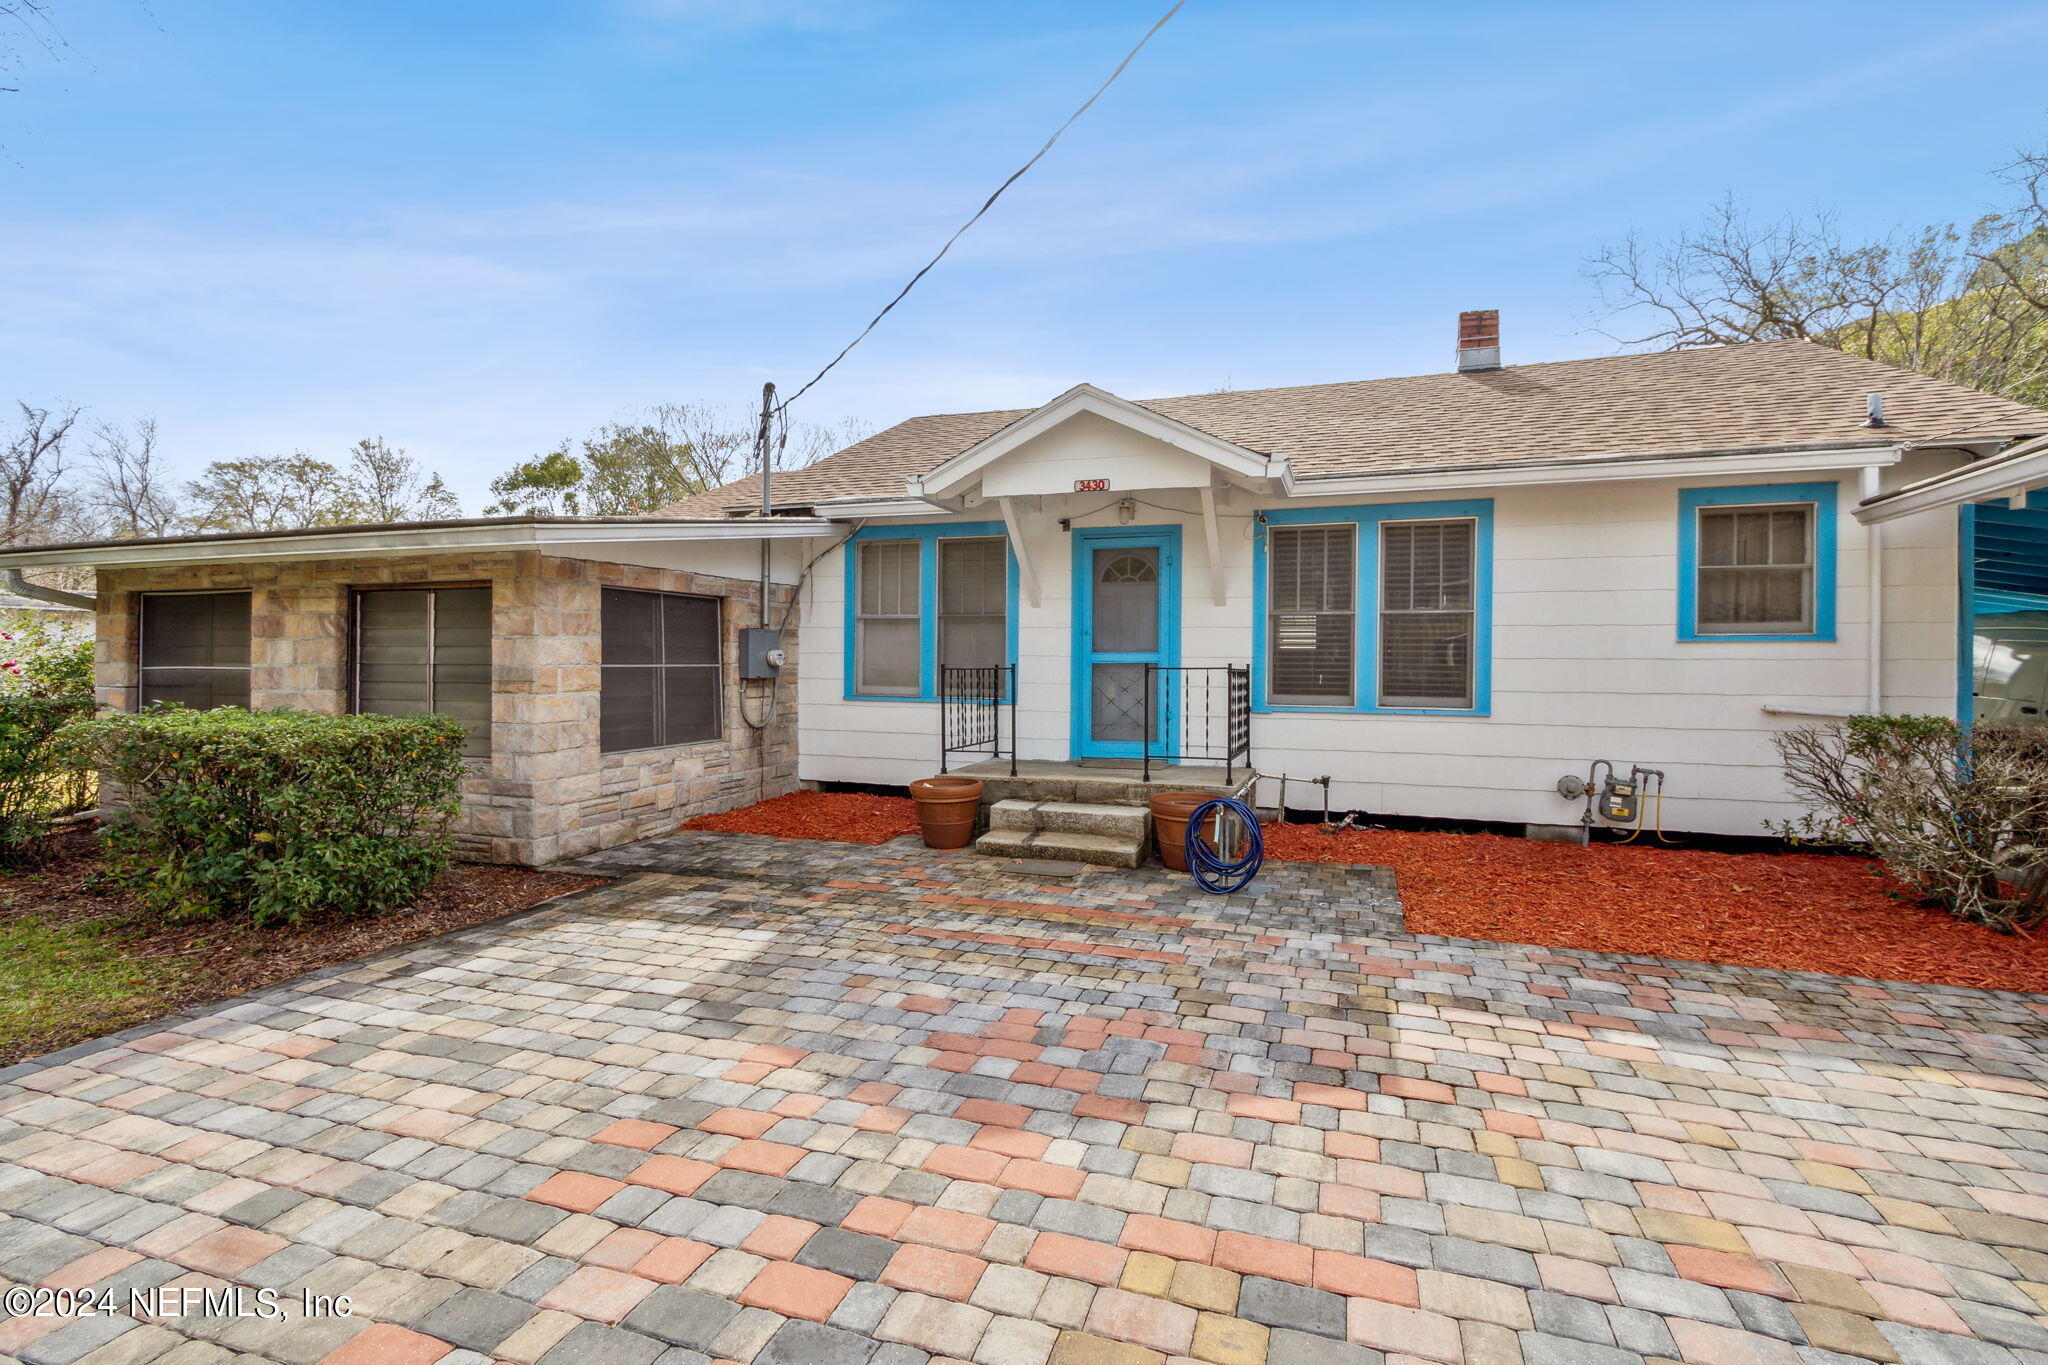 Jacksonville, FL home for sale located at 3430 Commonwealth Avenue, Jacksonville, FL 32254